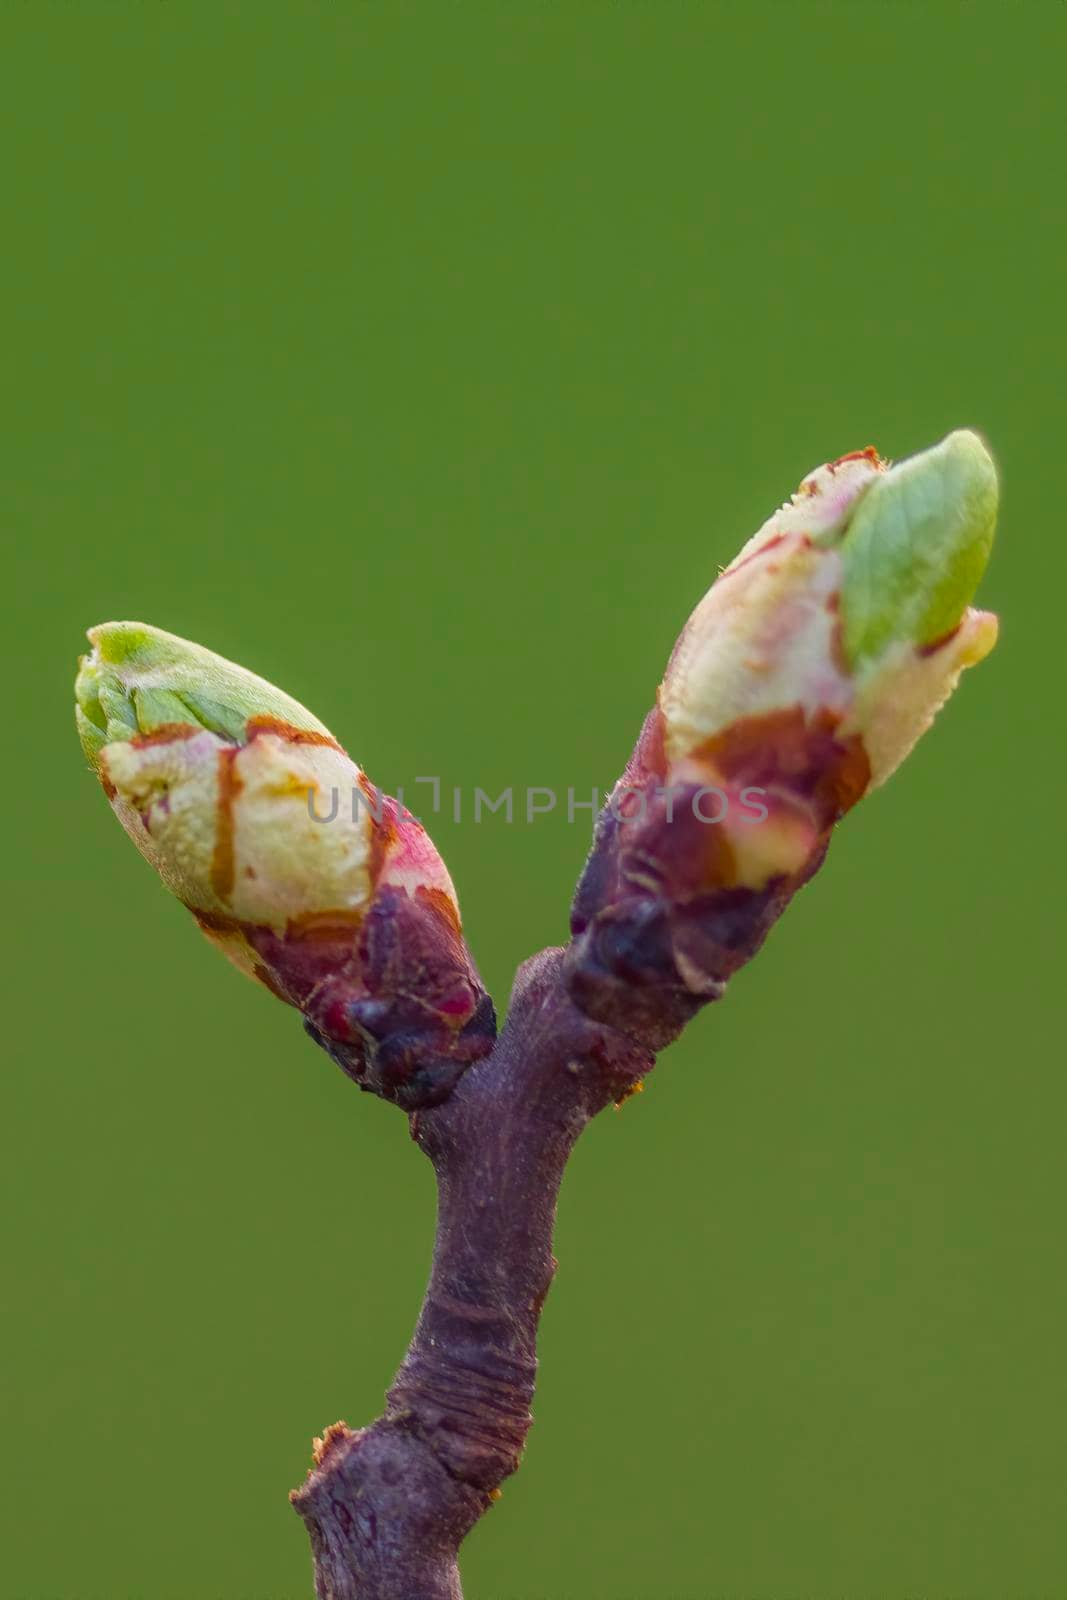 several fresh buds on a branch